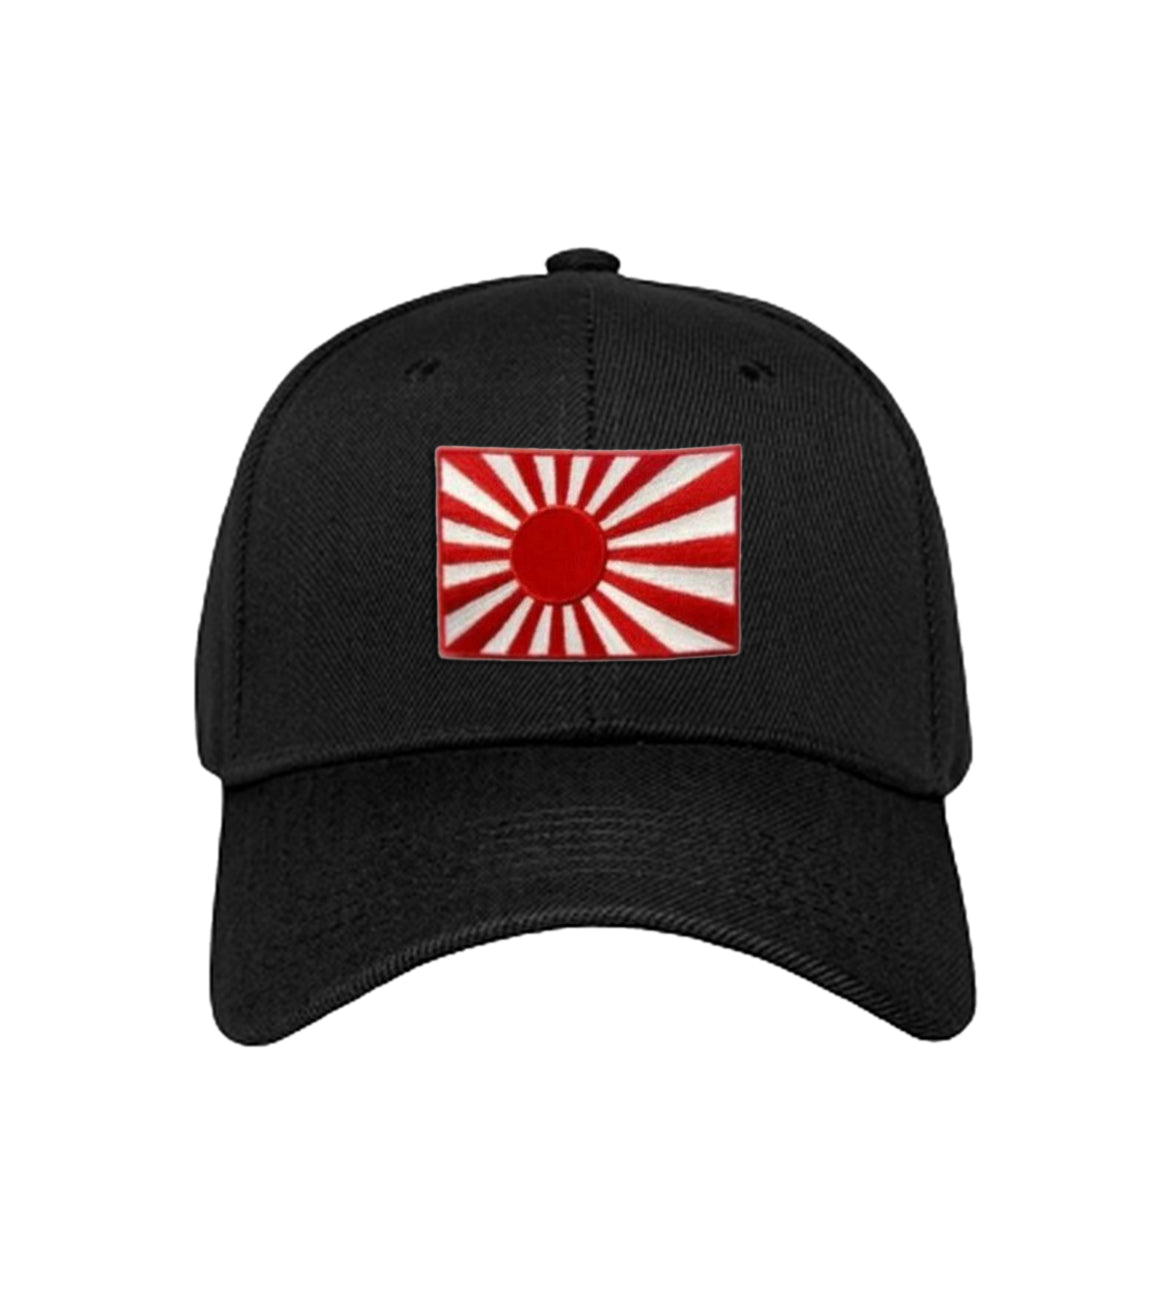 Japan Flag Patch (3.5 Inch) Iron-on Badge Mount Fuji Tokyo Japanese Rising Sun Gift Patches